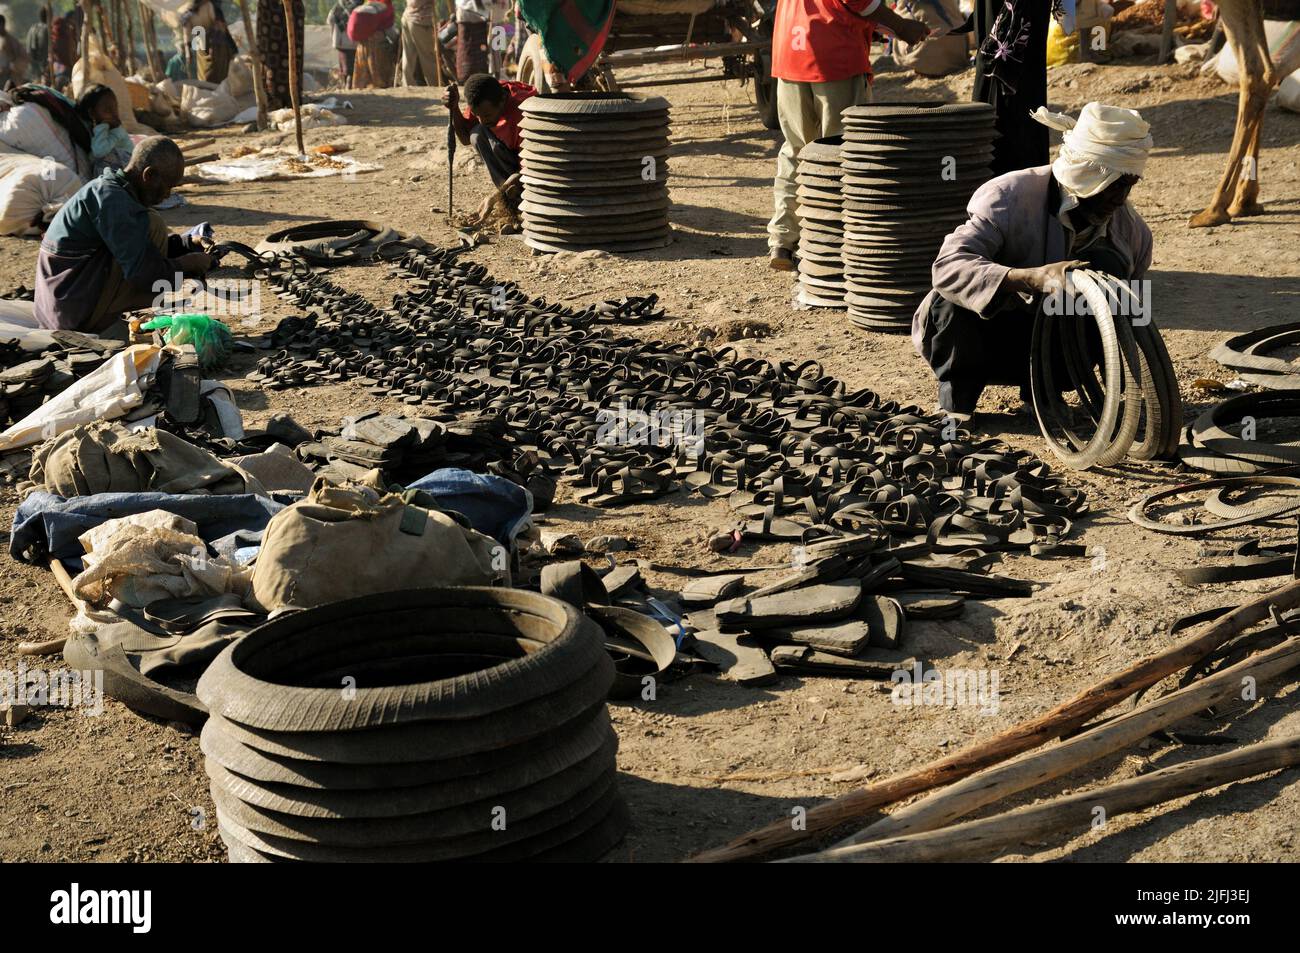 Sandals made with old tires at Bati market, Amhara Region, Ethiopia Stock Photo